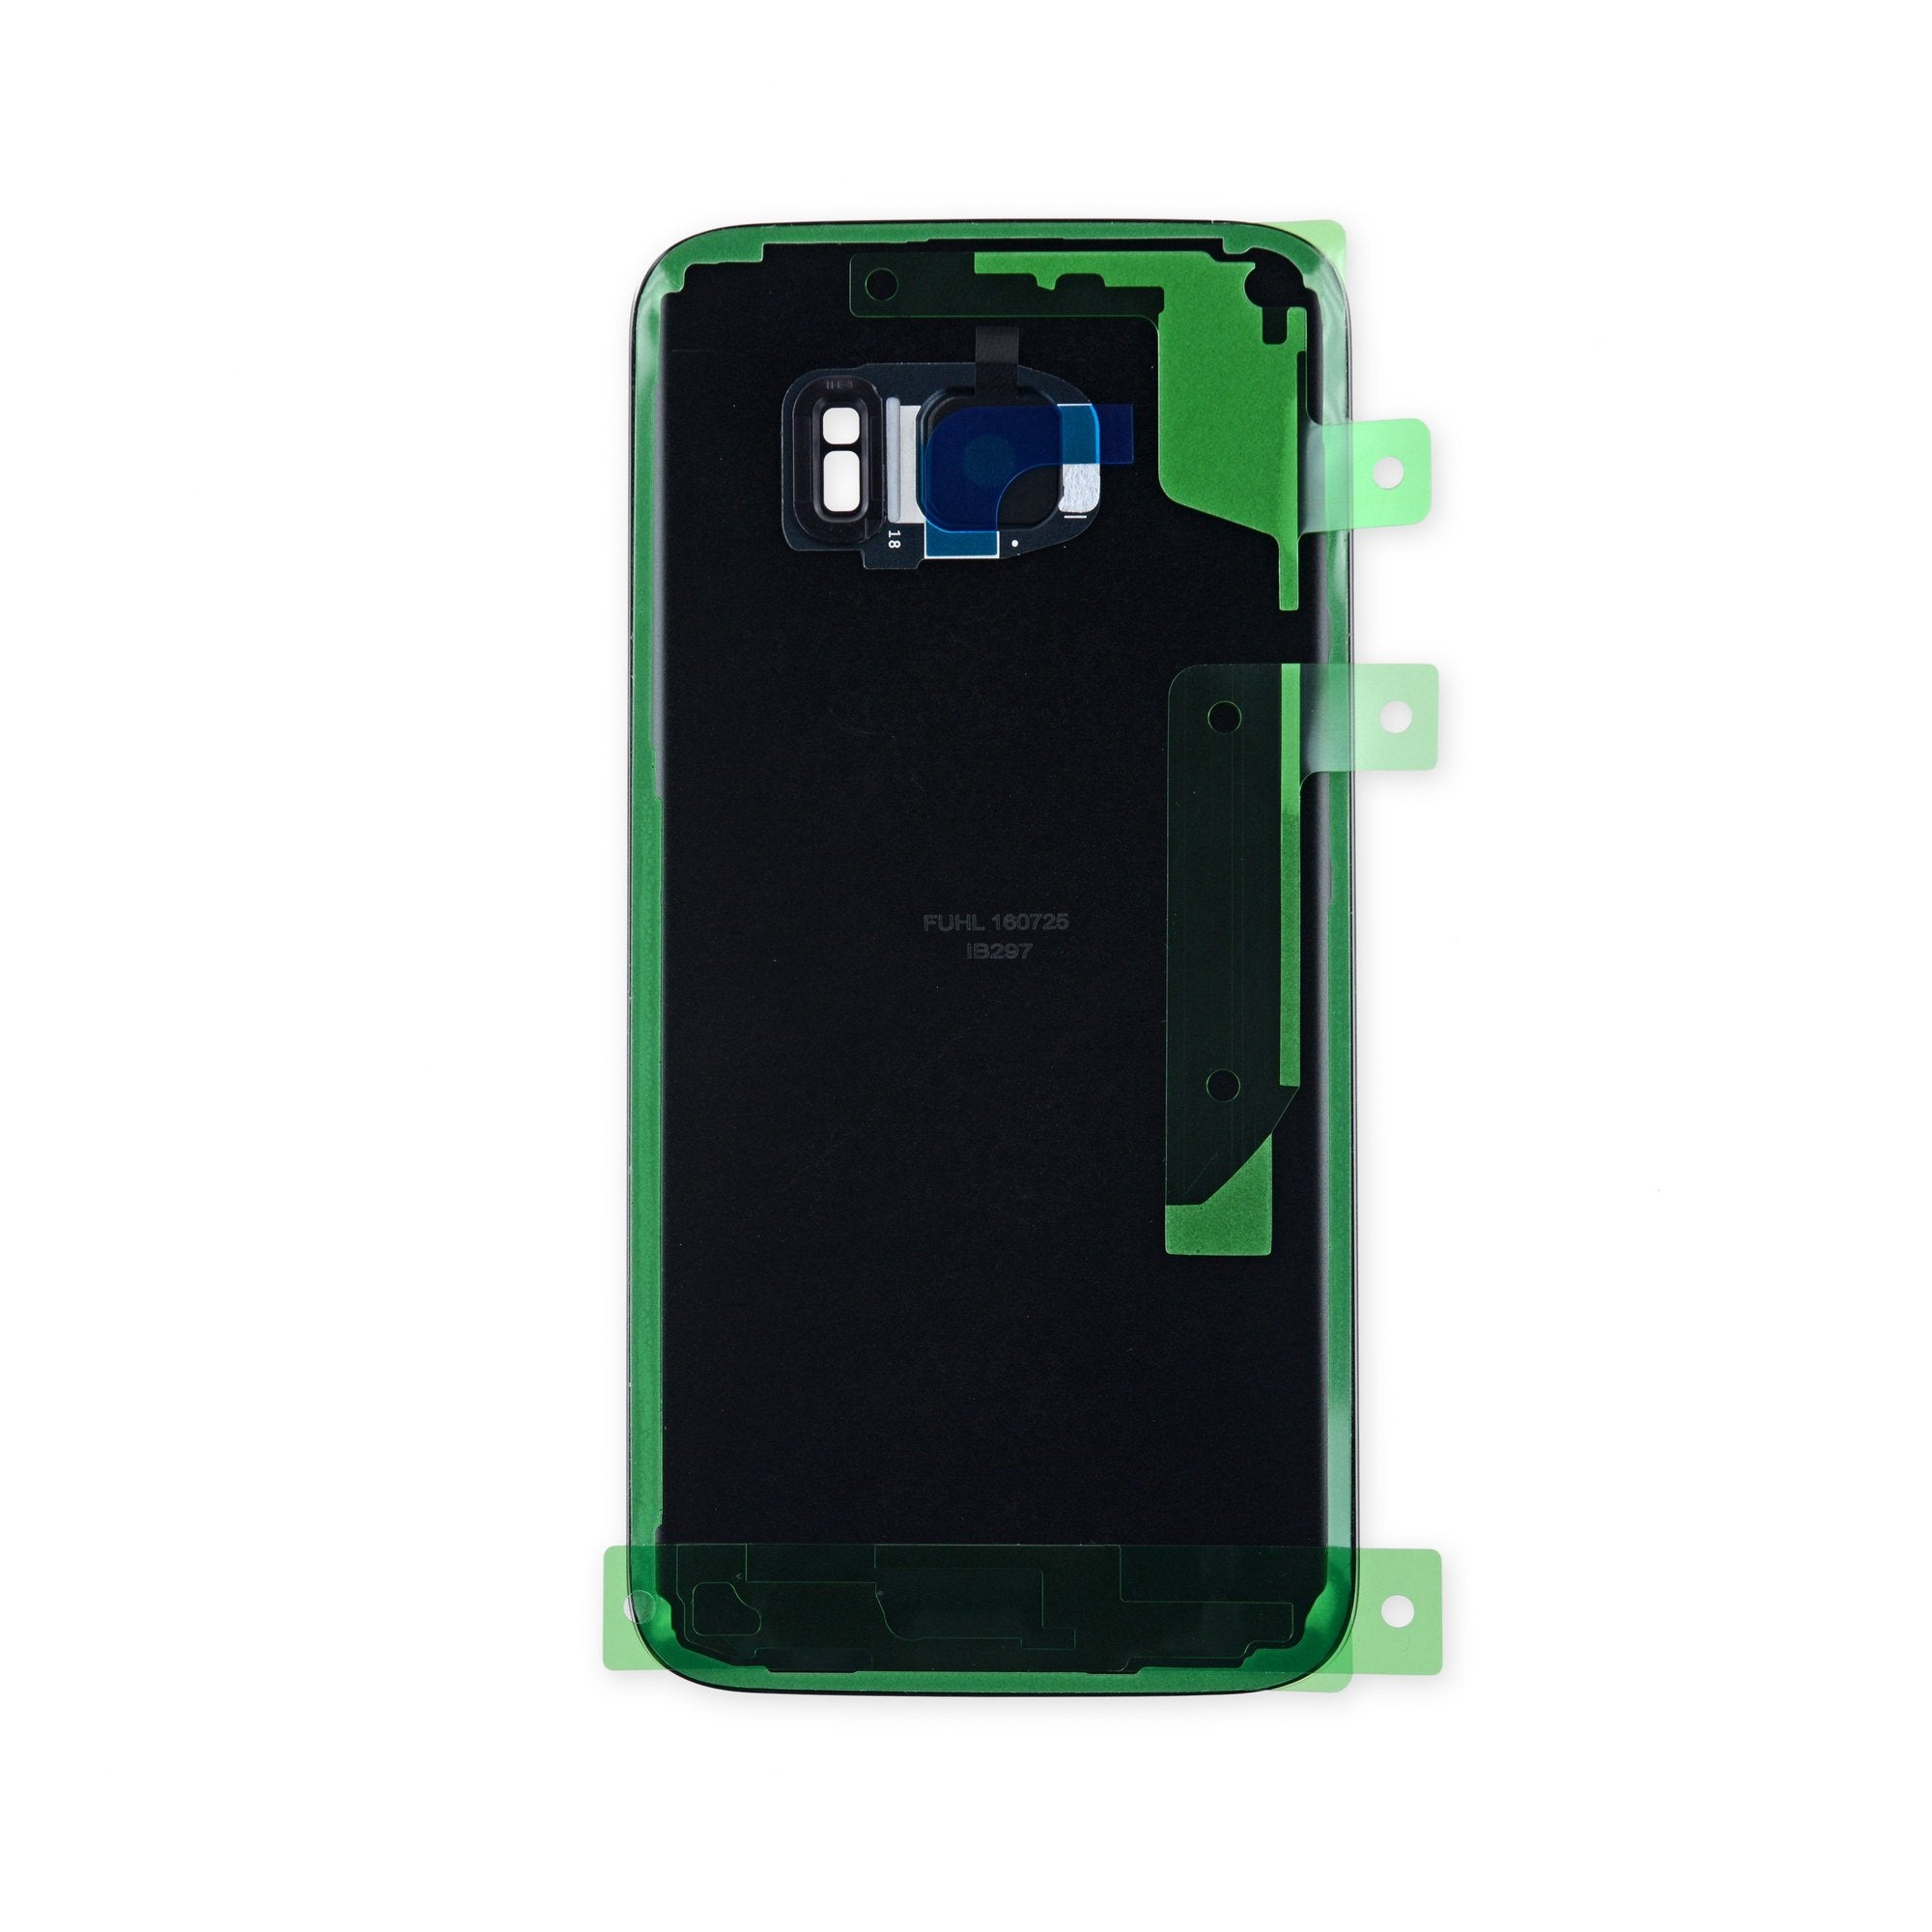 Galaxy S7 Rear Glass Panel/Cover - Original Black New Part Only